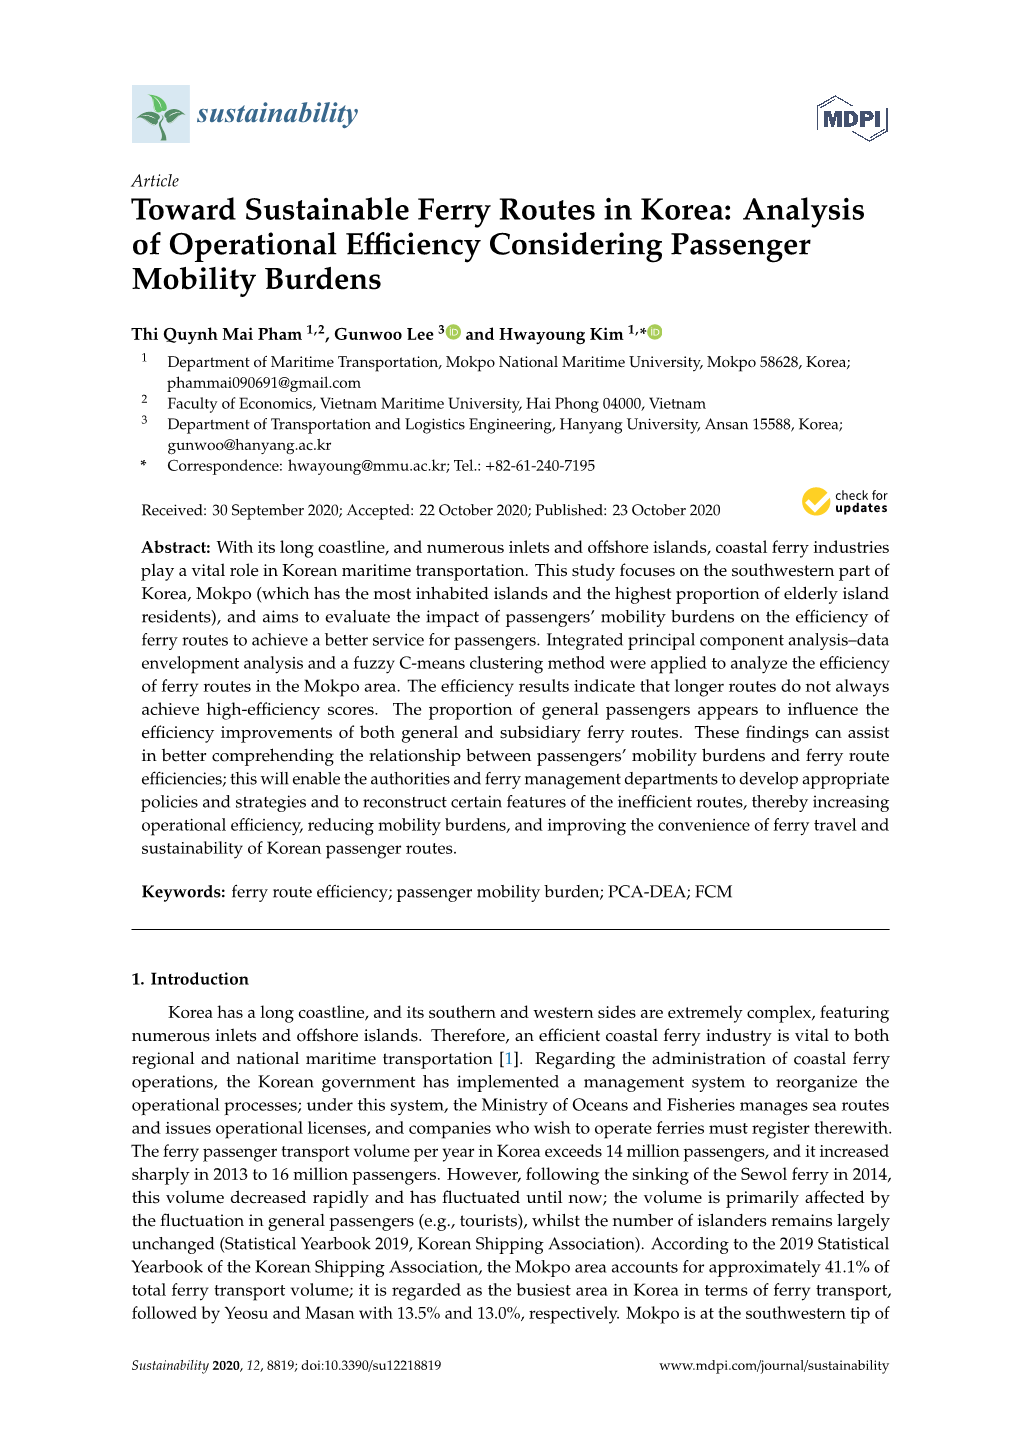 Toward Sustainable Ferry Routes in Korea: Analysis of Operational Eﬃciency Considering Passenger Mobility Burdens